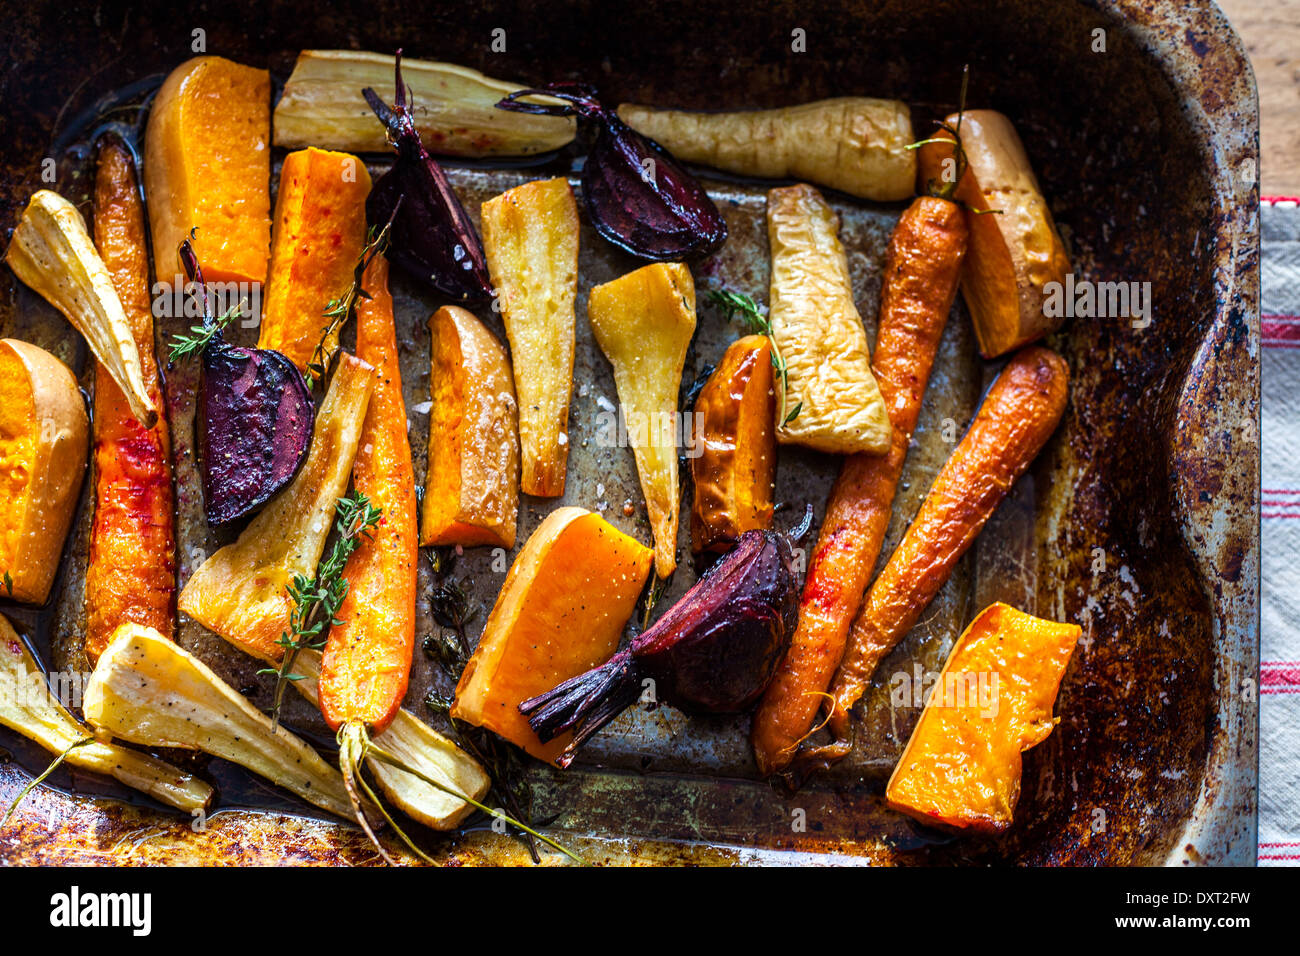 A tray of oven roasted vegetables Stock Photo